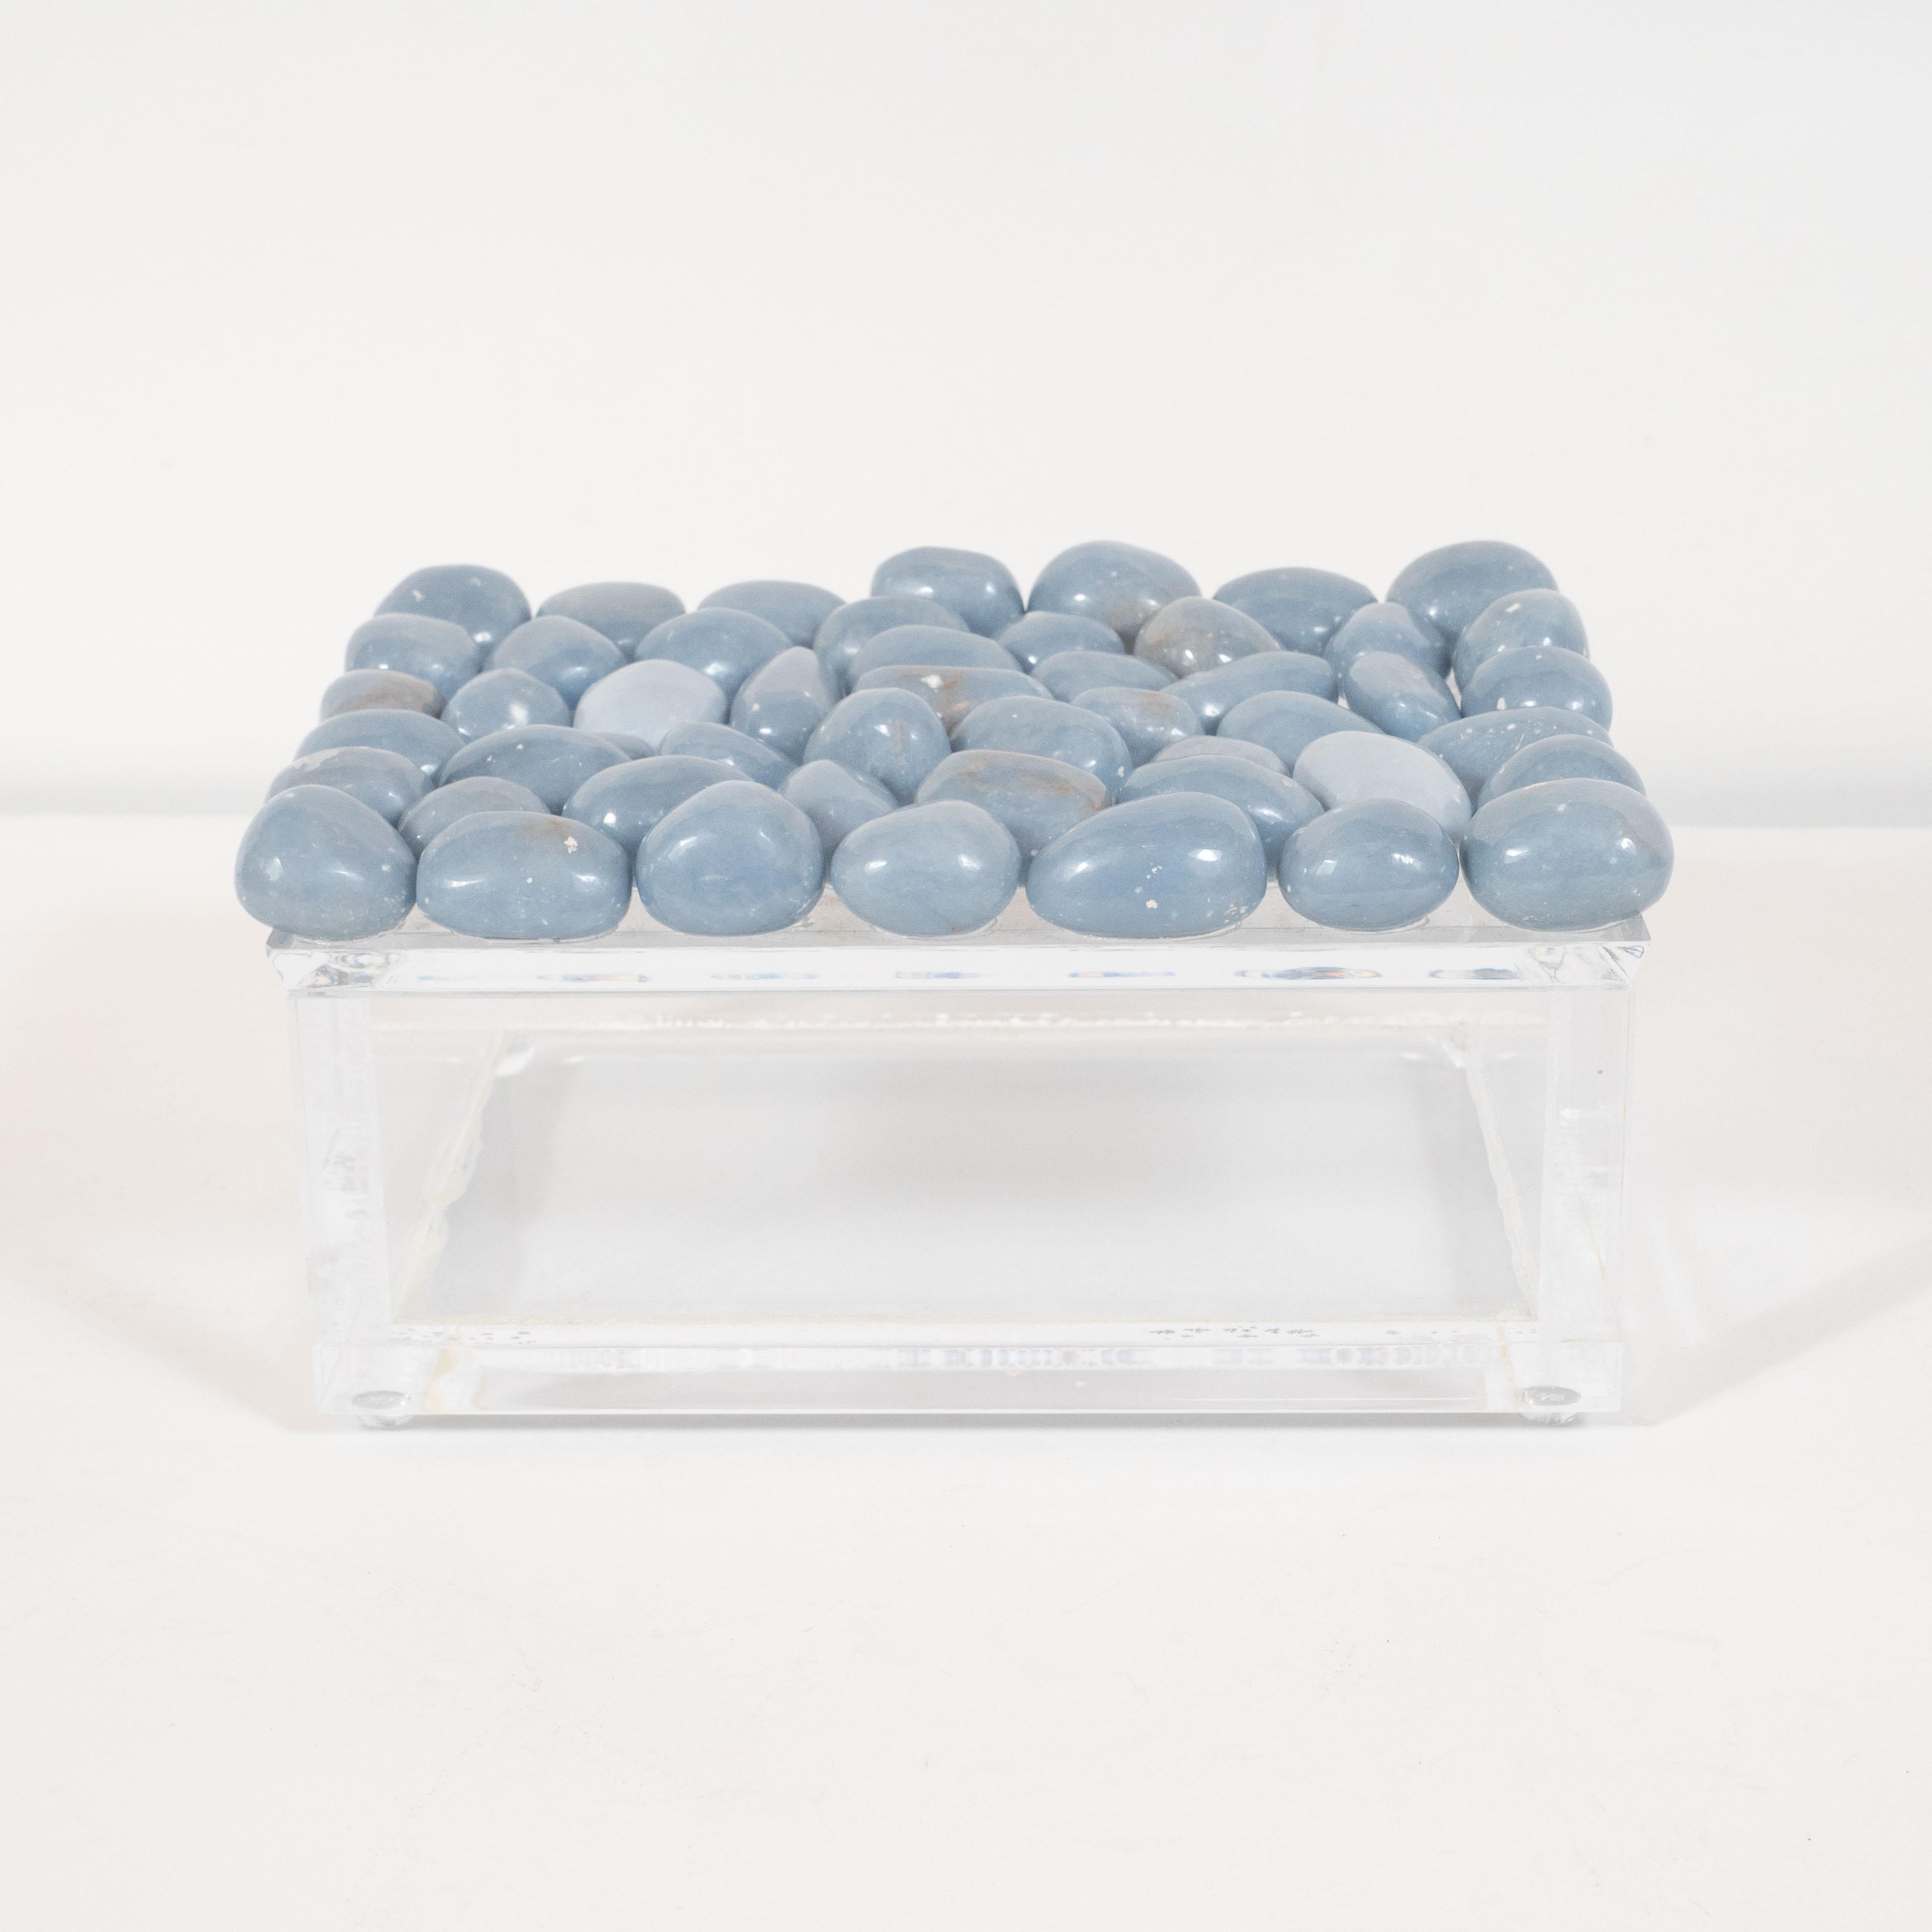 American Modernist Volumetric Rectangular Lucite Box with Muted Blue Stone Detailing